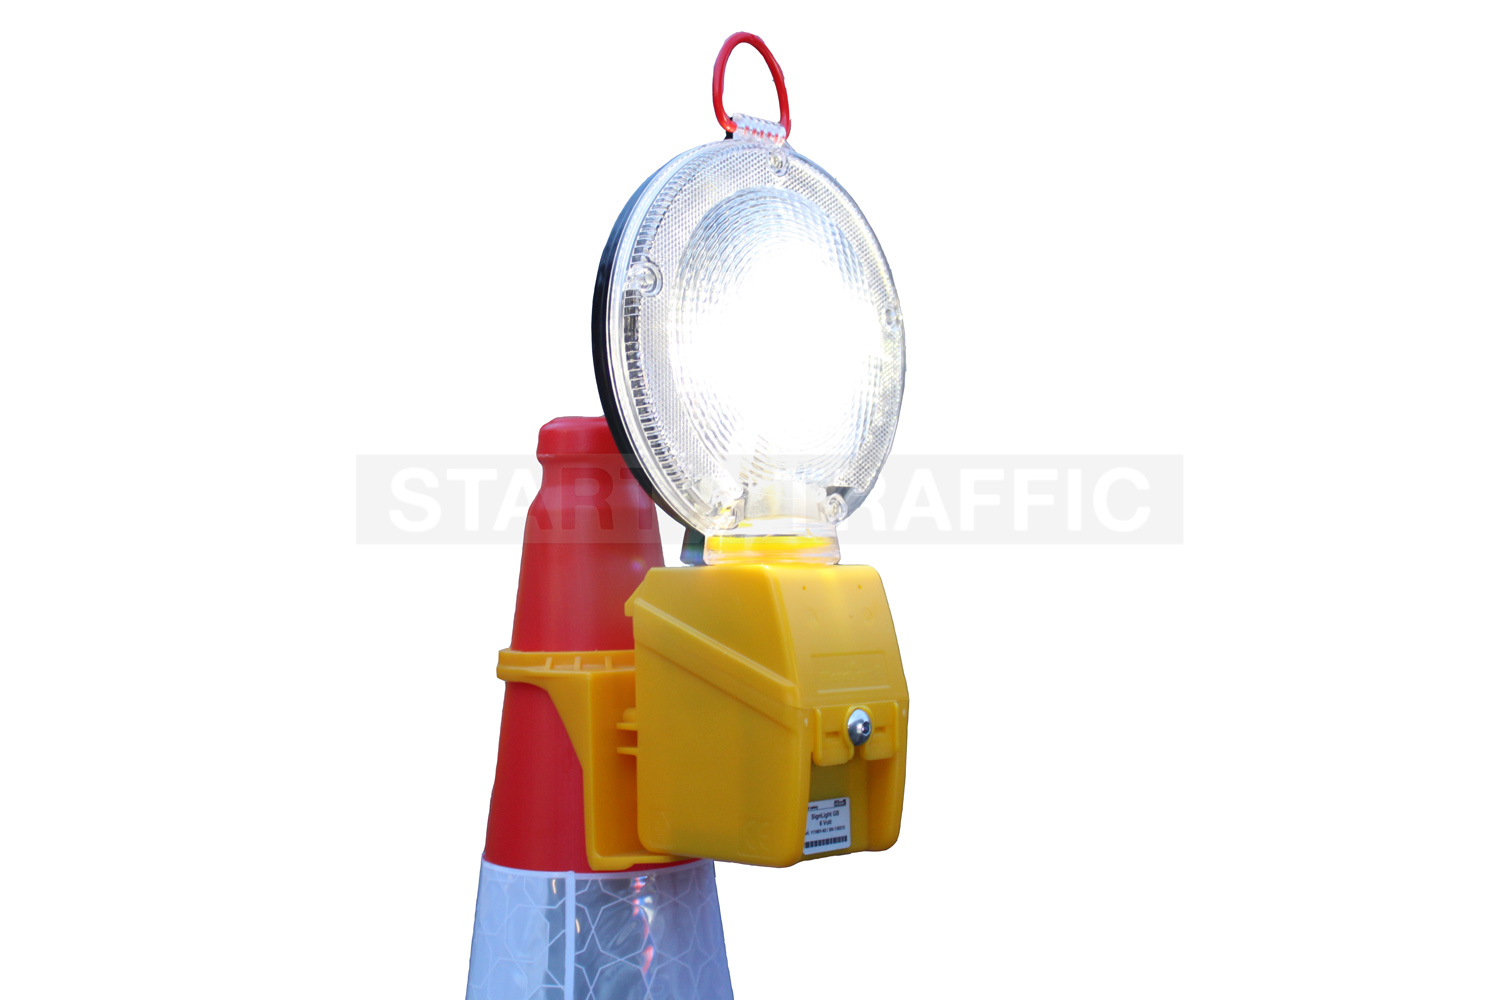 Shot of the lamp mounted onto a traffic cone